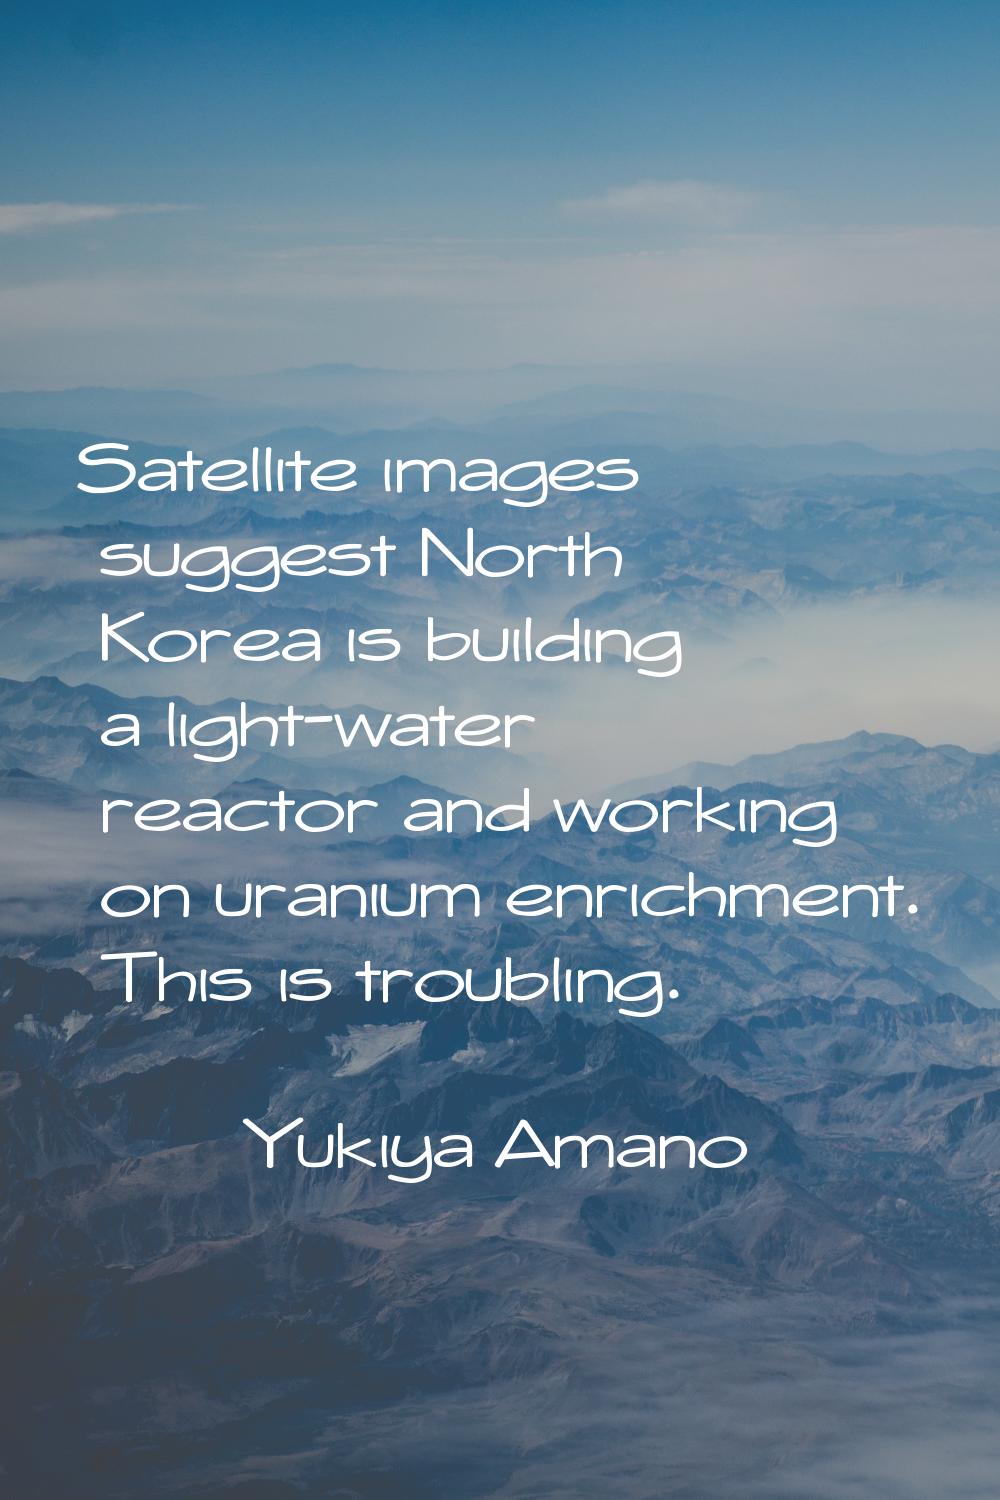 Satellite images suggest North Korea is building a light-water reactor and working on uranium enric